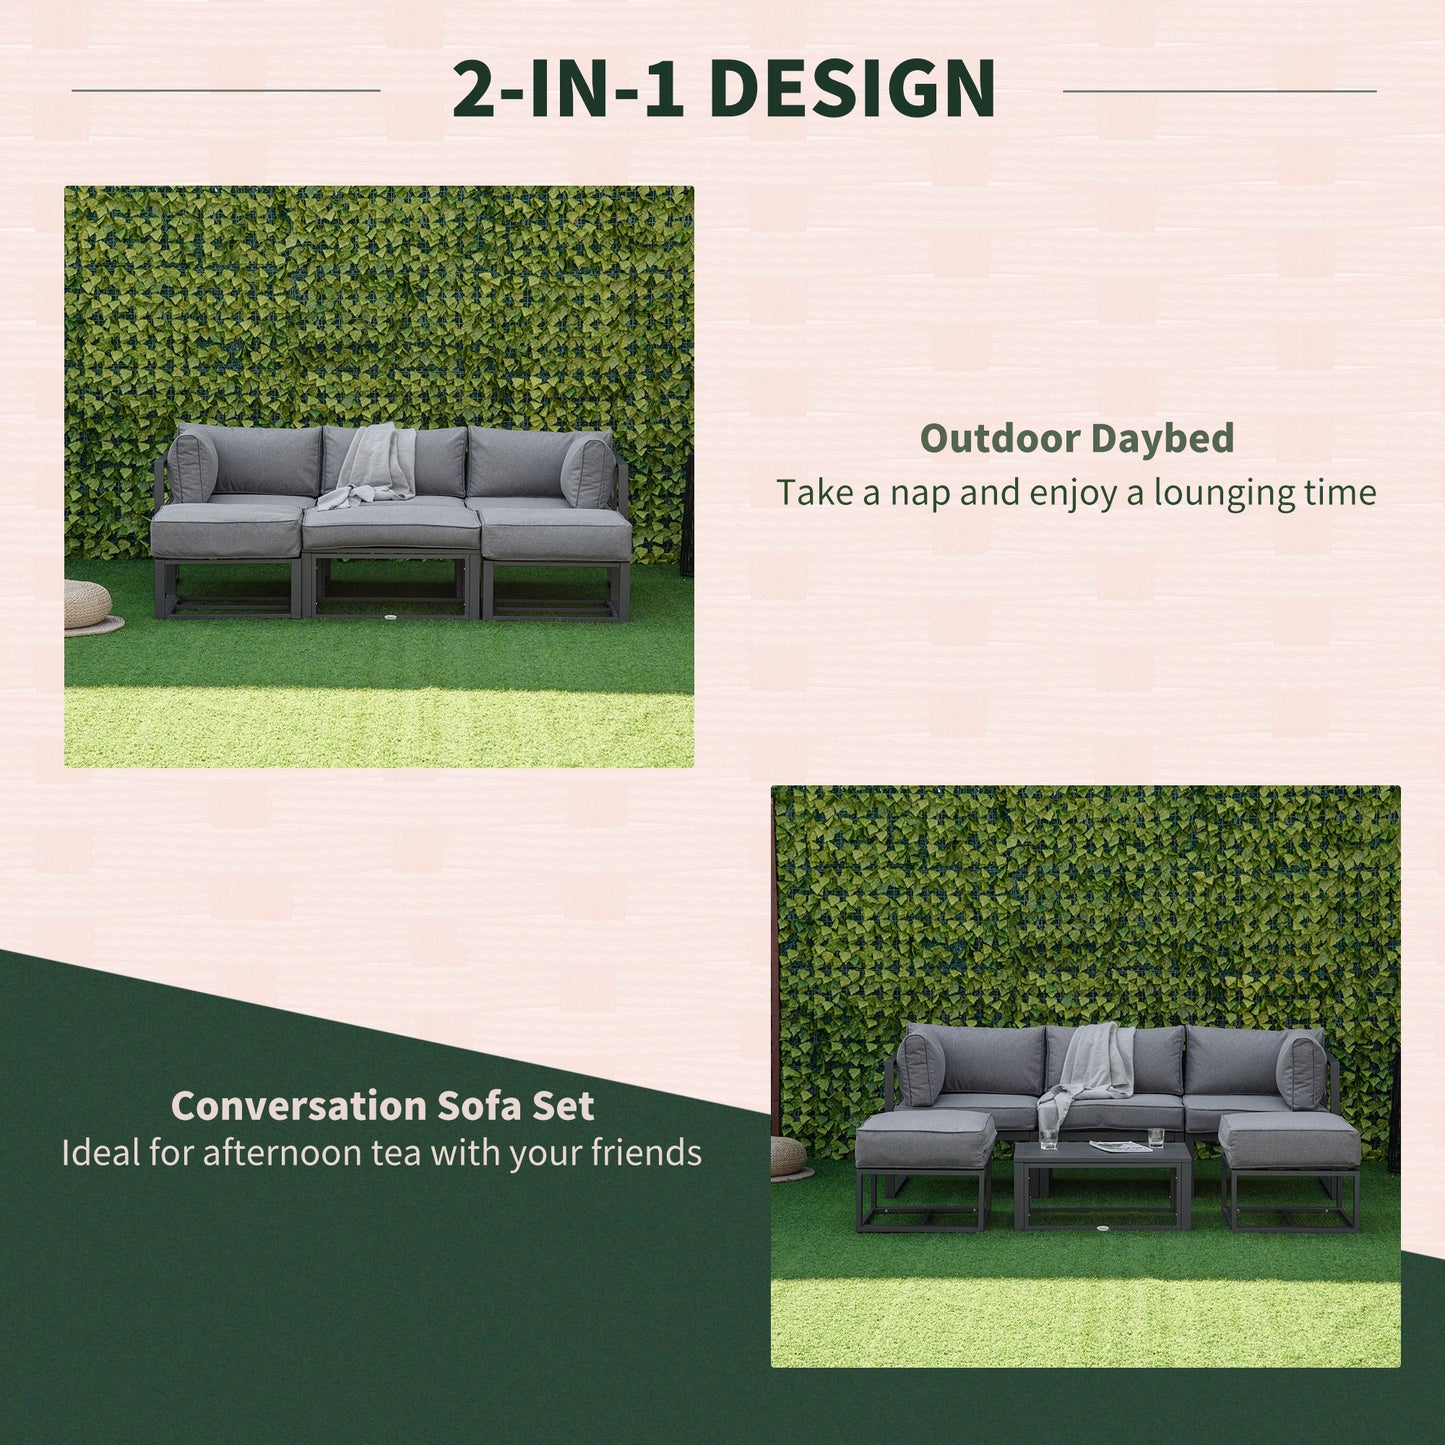 Outsunny Garden Daybed, 6 Piece Outdoor Sectional Sofa Set, Aluminum Patio Conversation Furniture Set with Coffee Table, Footstool and Cushions, Grey PC Daybed w/ Table